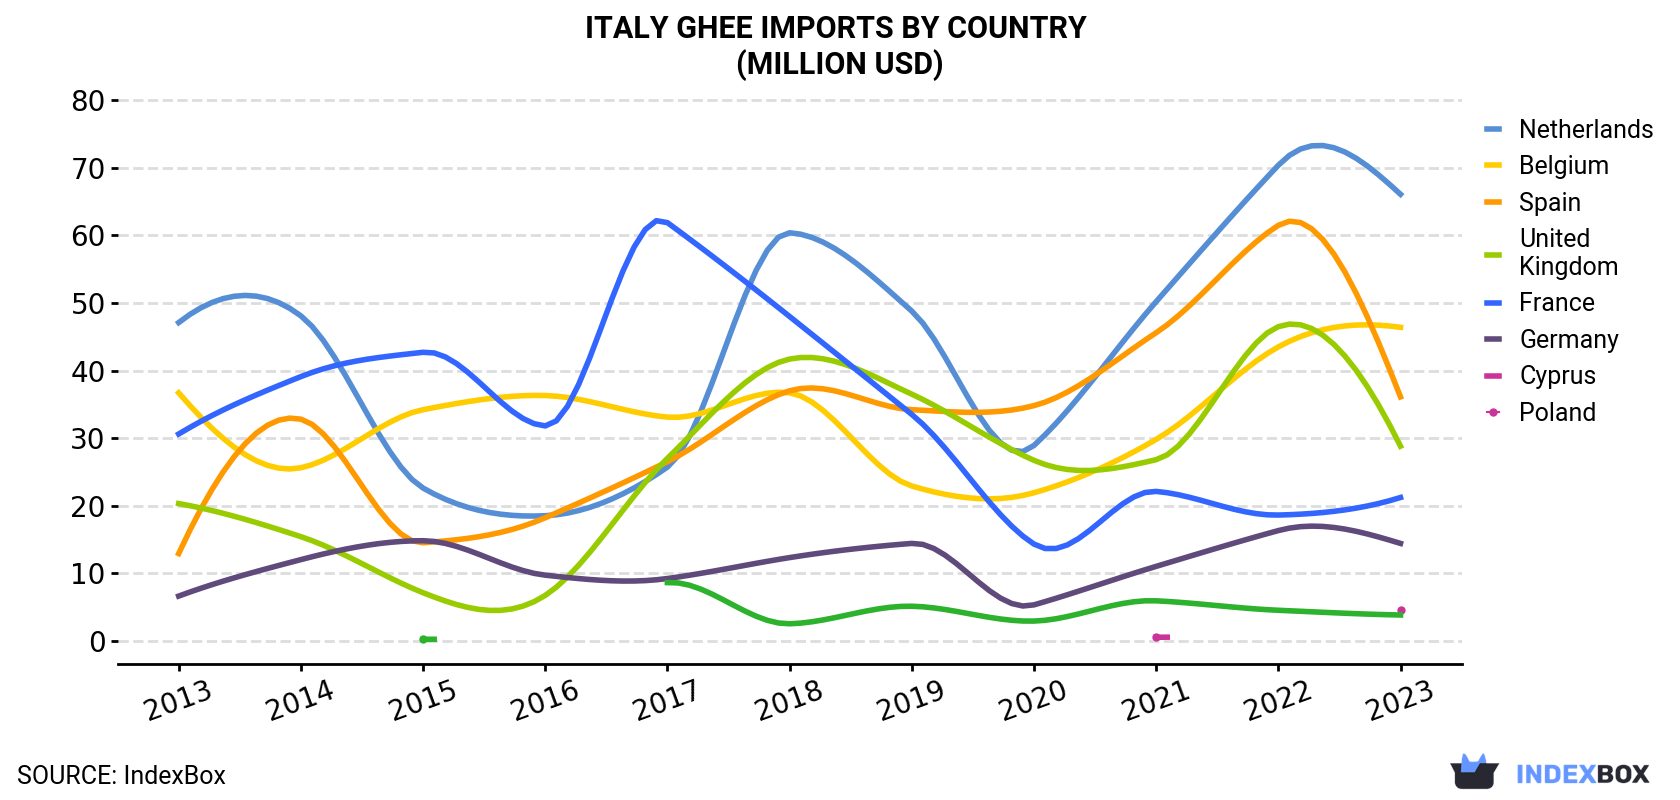 Italy Ghee Imports By Country (Million USD)